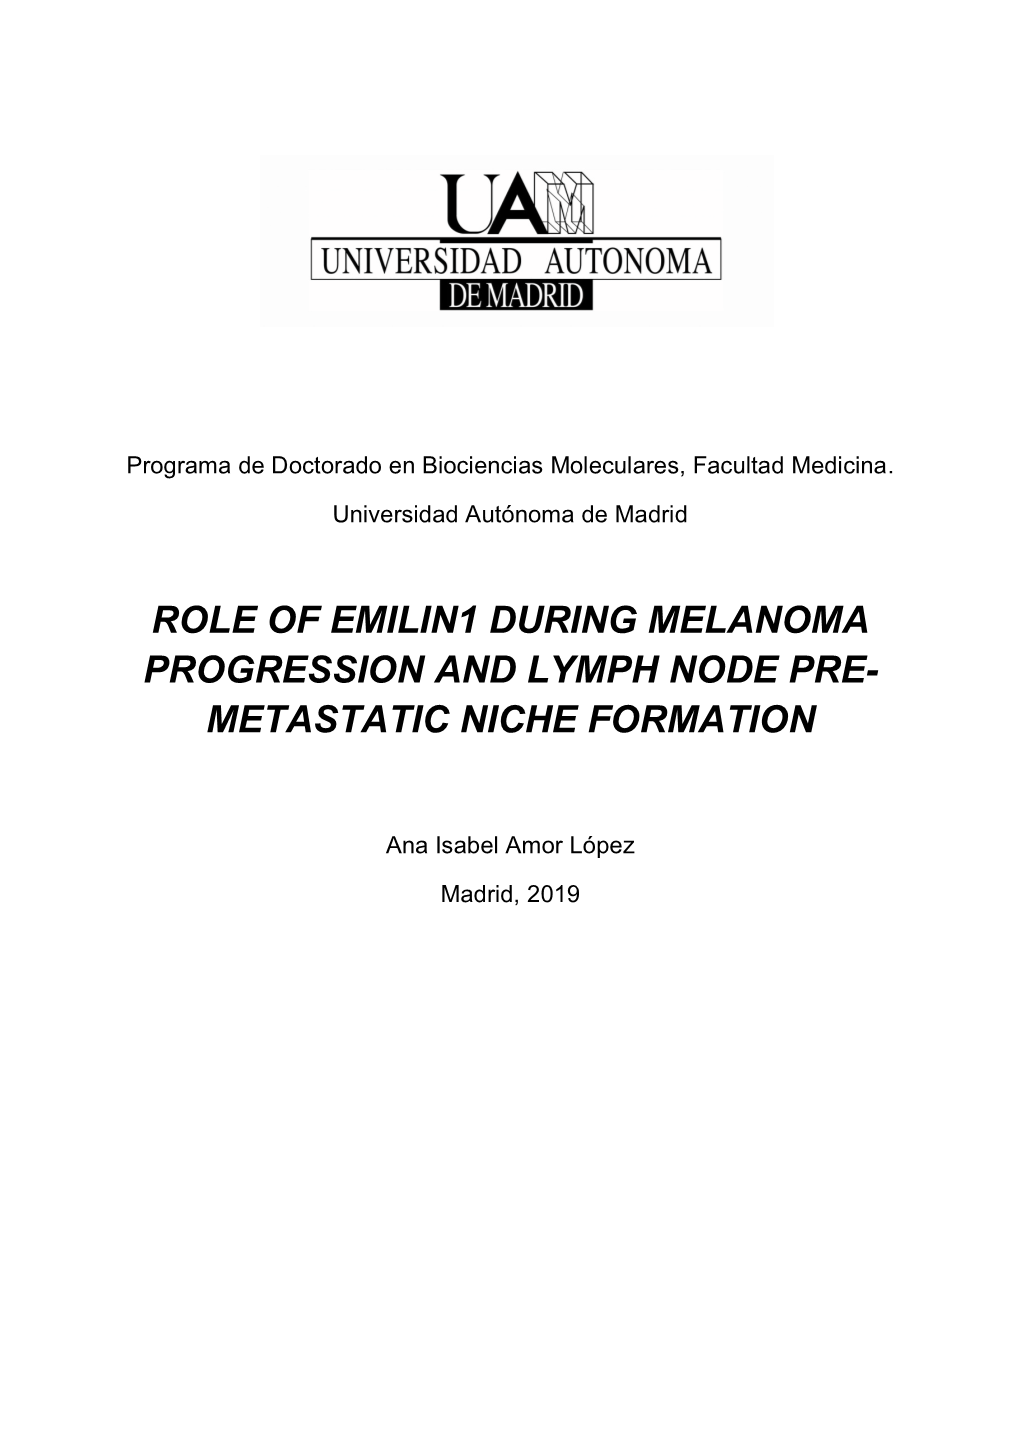 Role of Emilin1 During Melanoma Progression and Lymph Node Pre - Metastatic Niche Formation